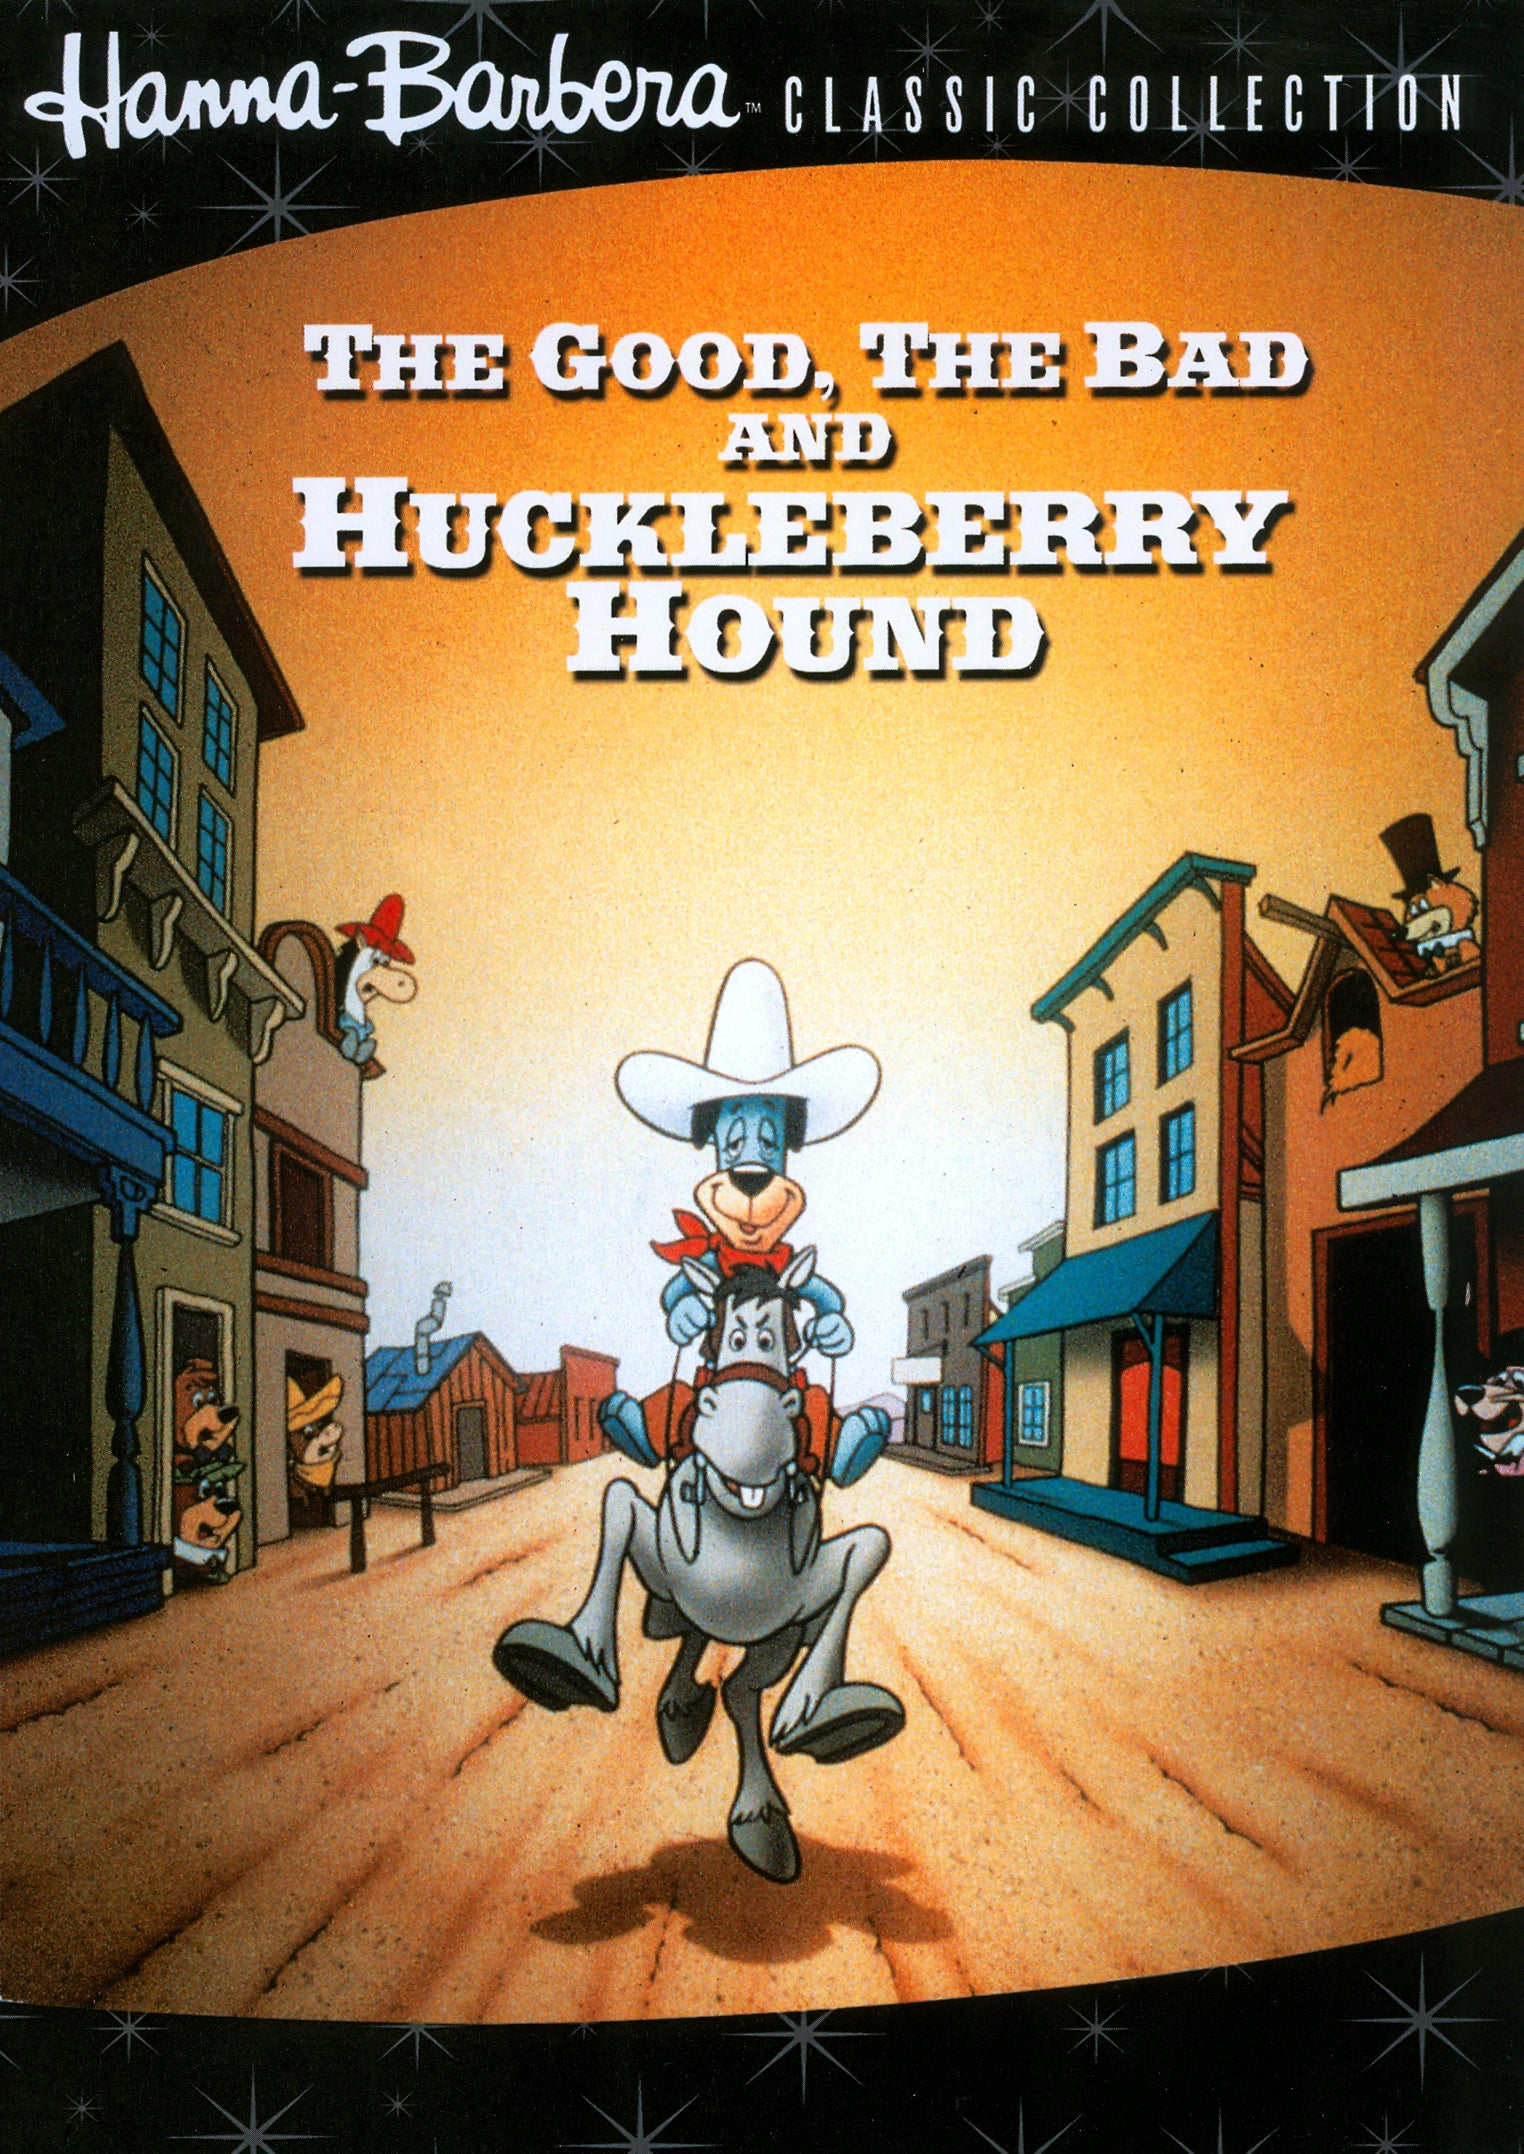 Good, the Bad, and the Huckleberry Hound cover art